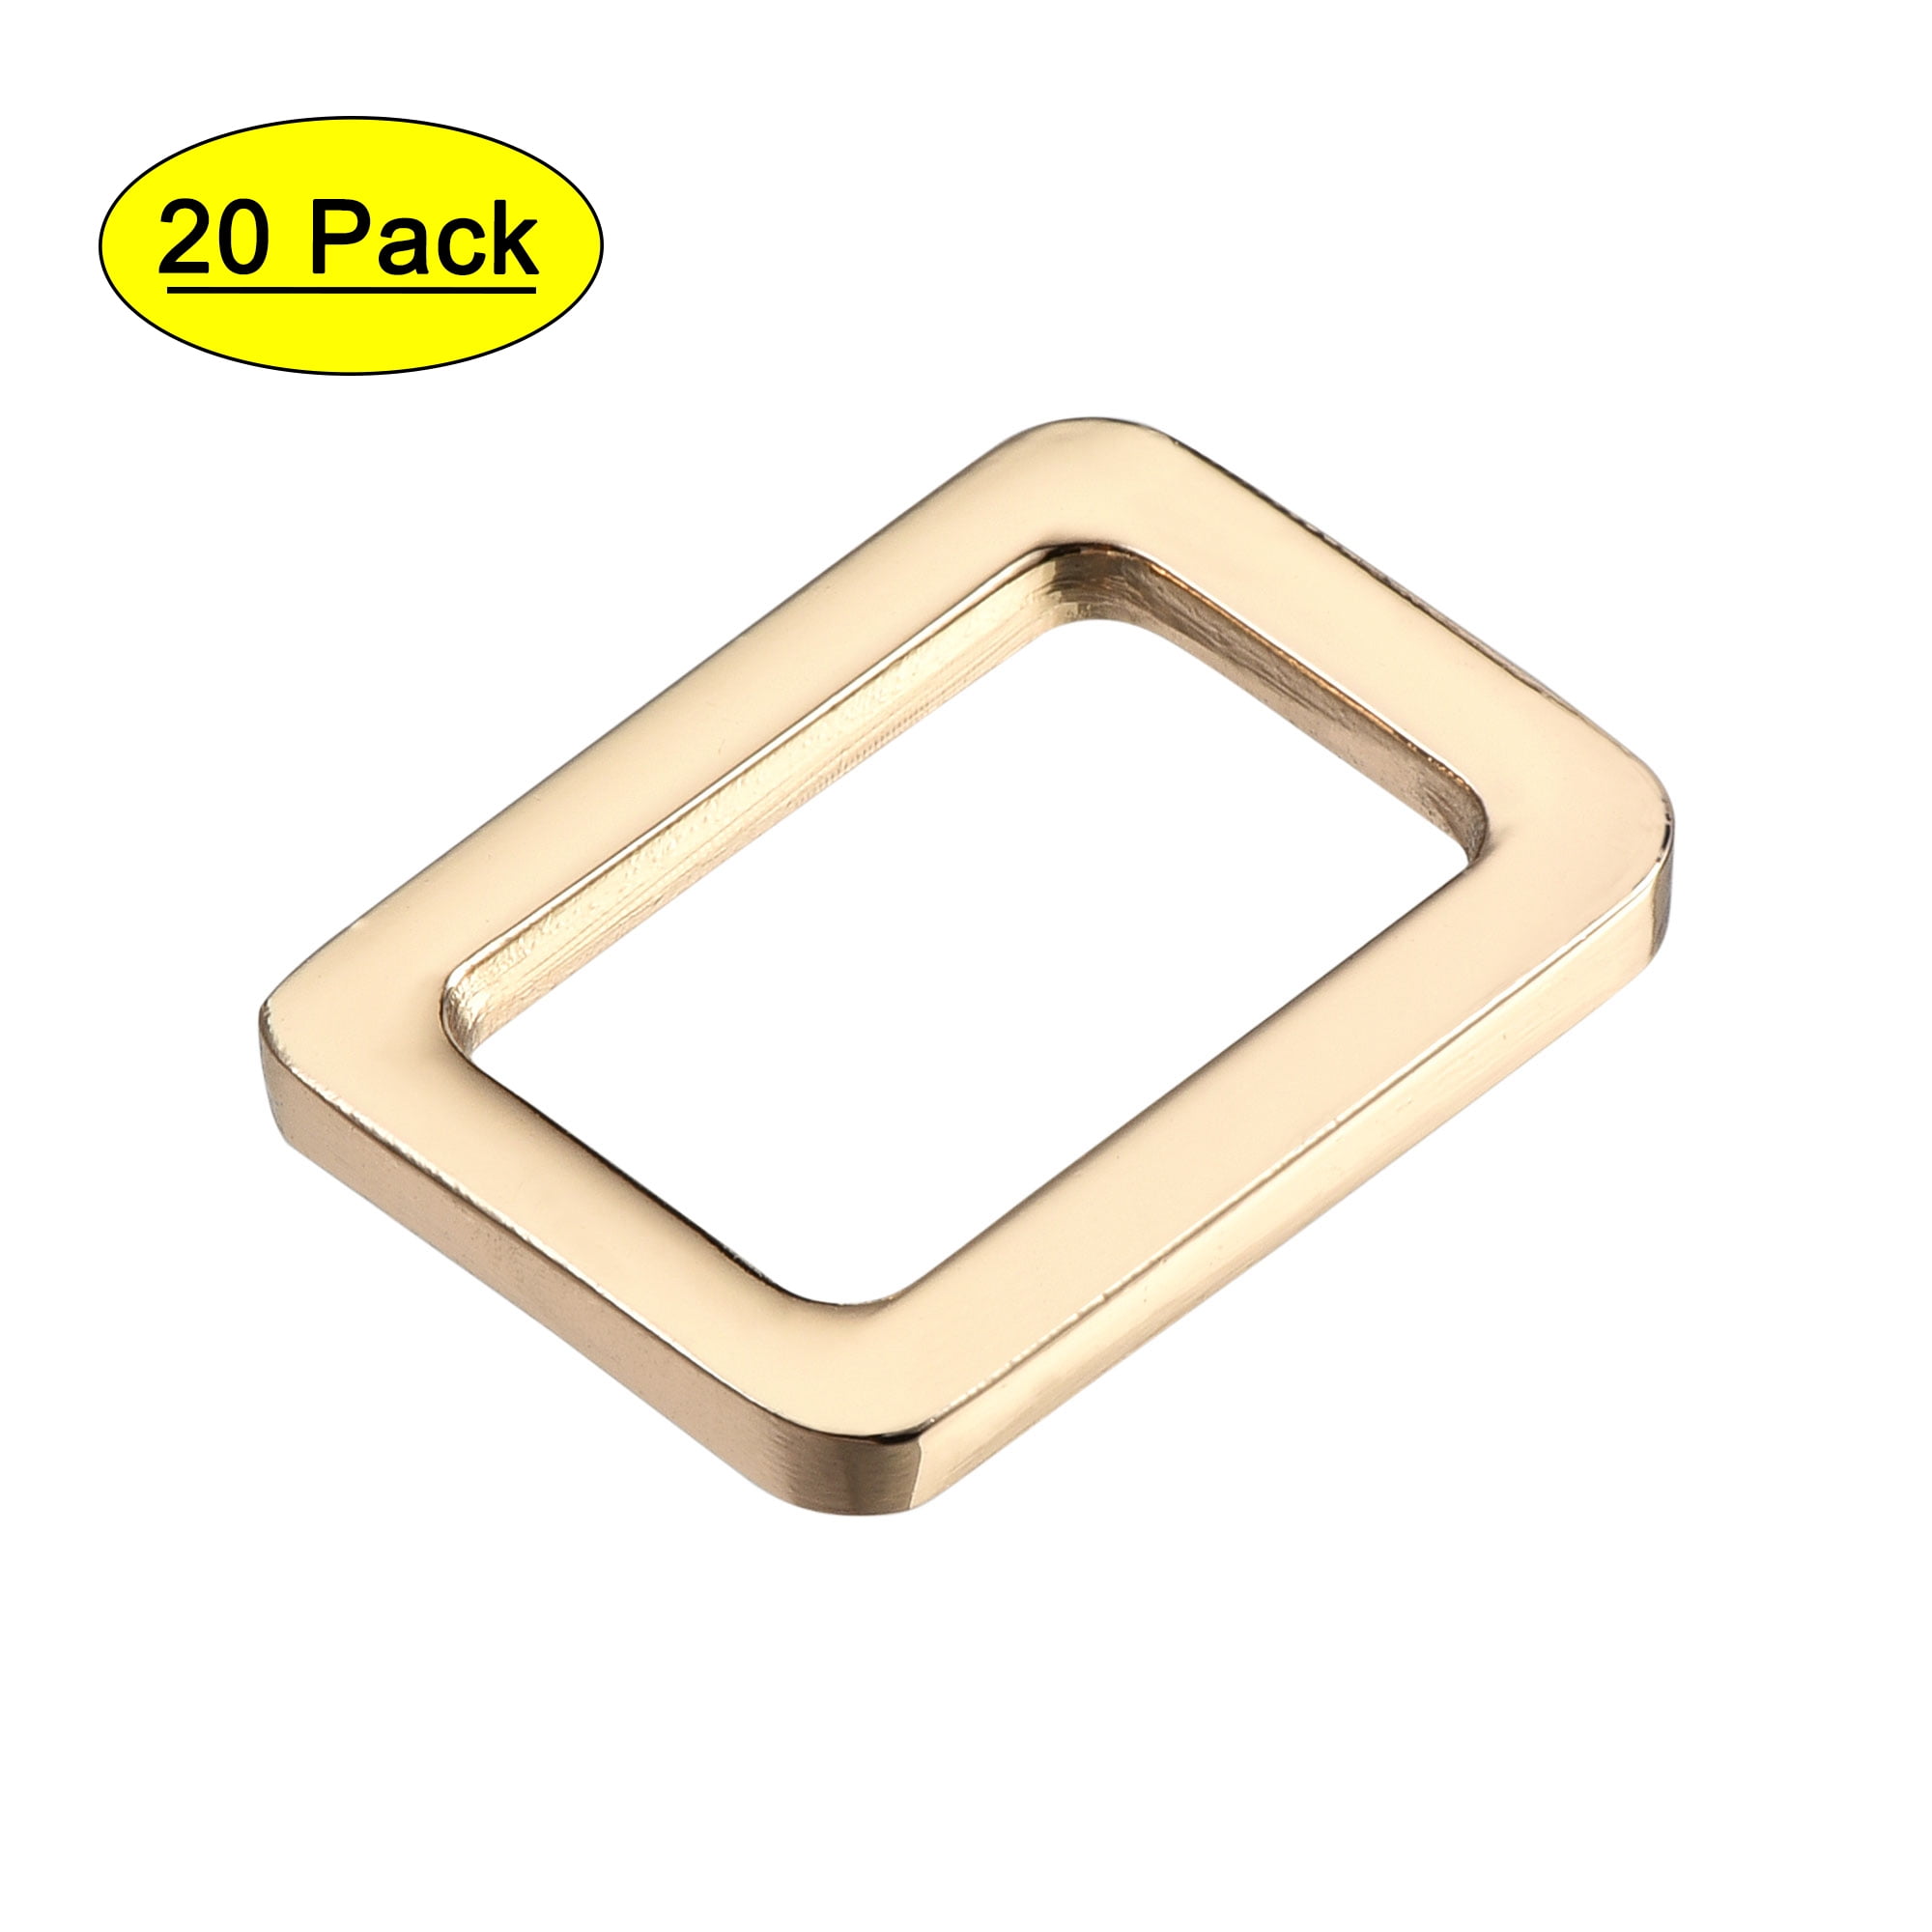 19.5x12.3mm Rectangle Buckles Electroplated Gold Tone 20 Pack - Walmart.com